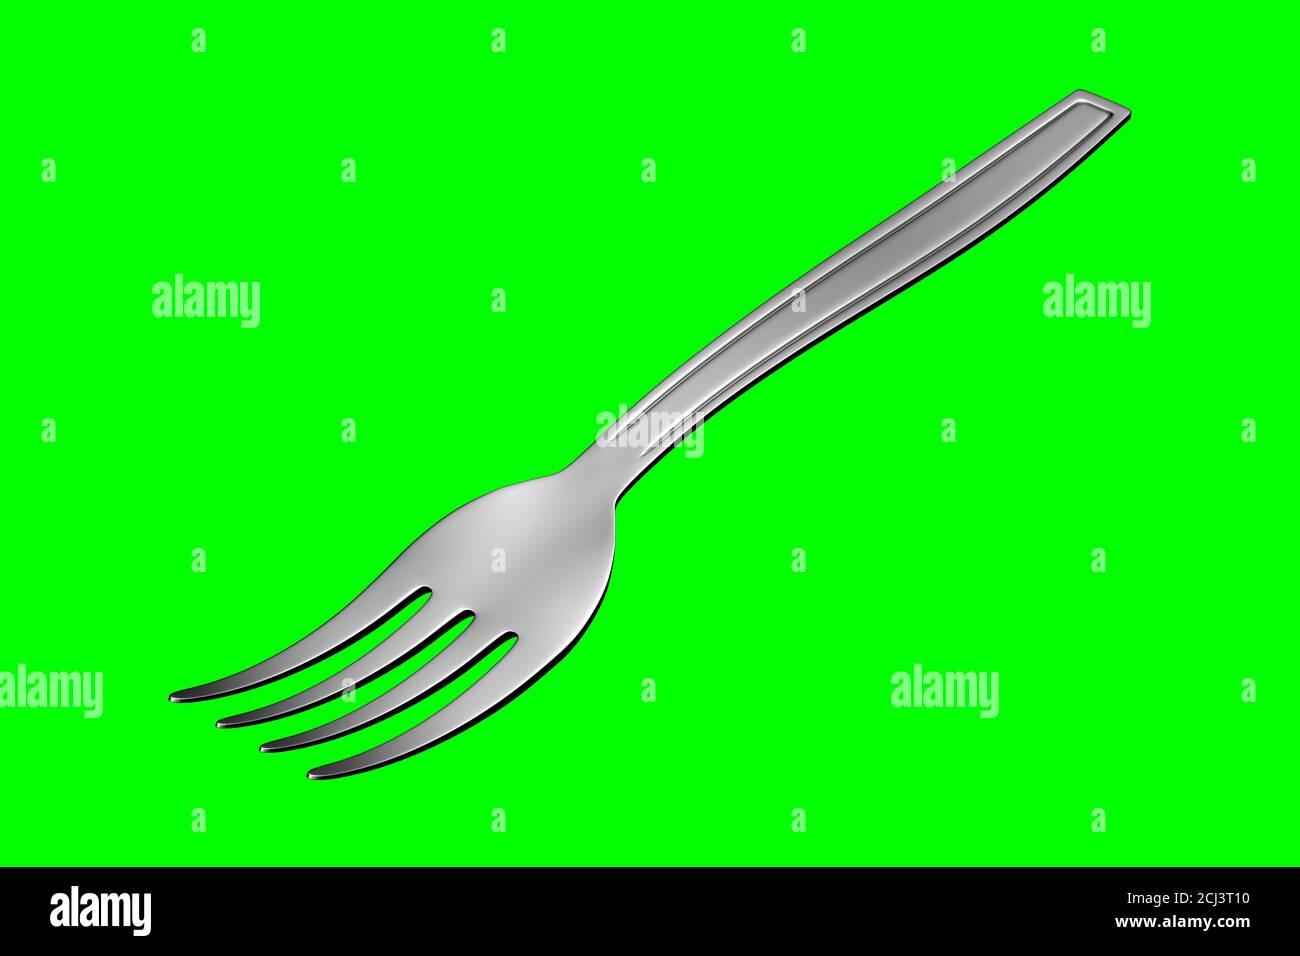 3D image of a fork in a green screen background Stock Photo